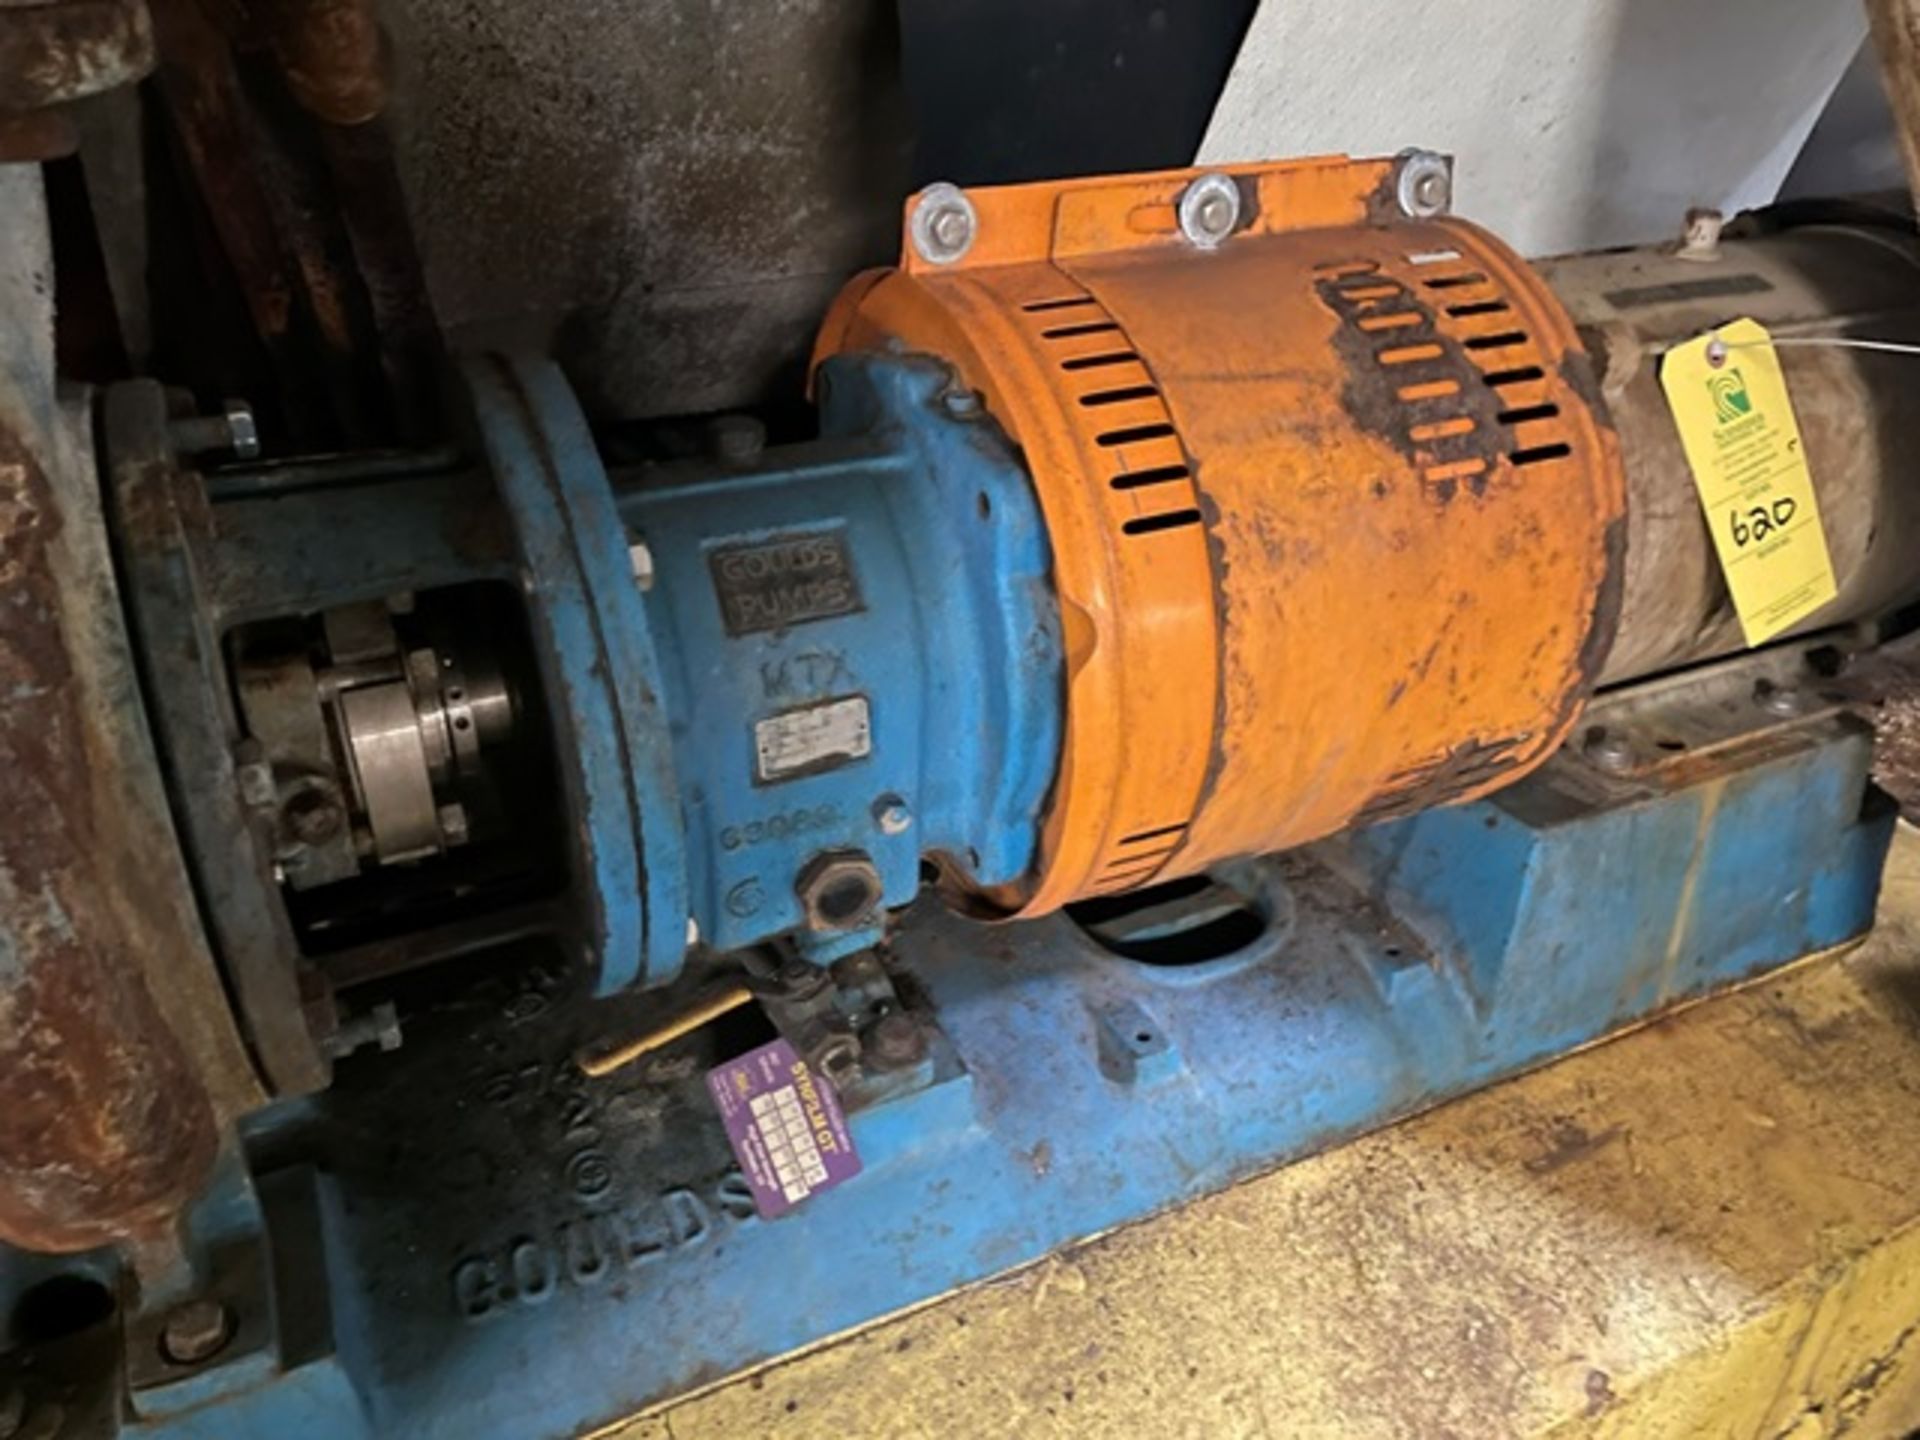 General Electric 7.5 HP Motor & Goulds MTX Pump, Rigging & Loading Fee: $300 - Image 3 of 3